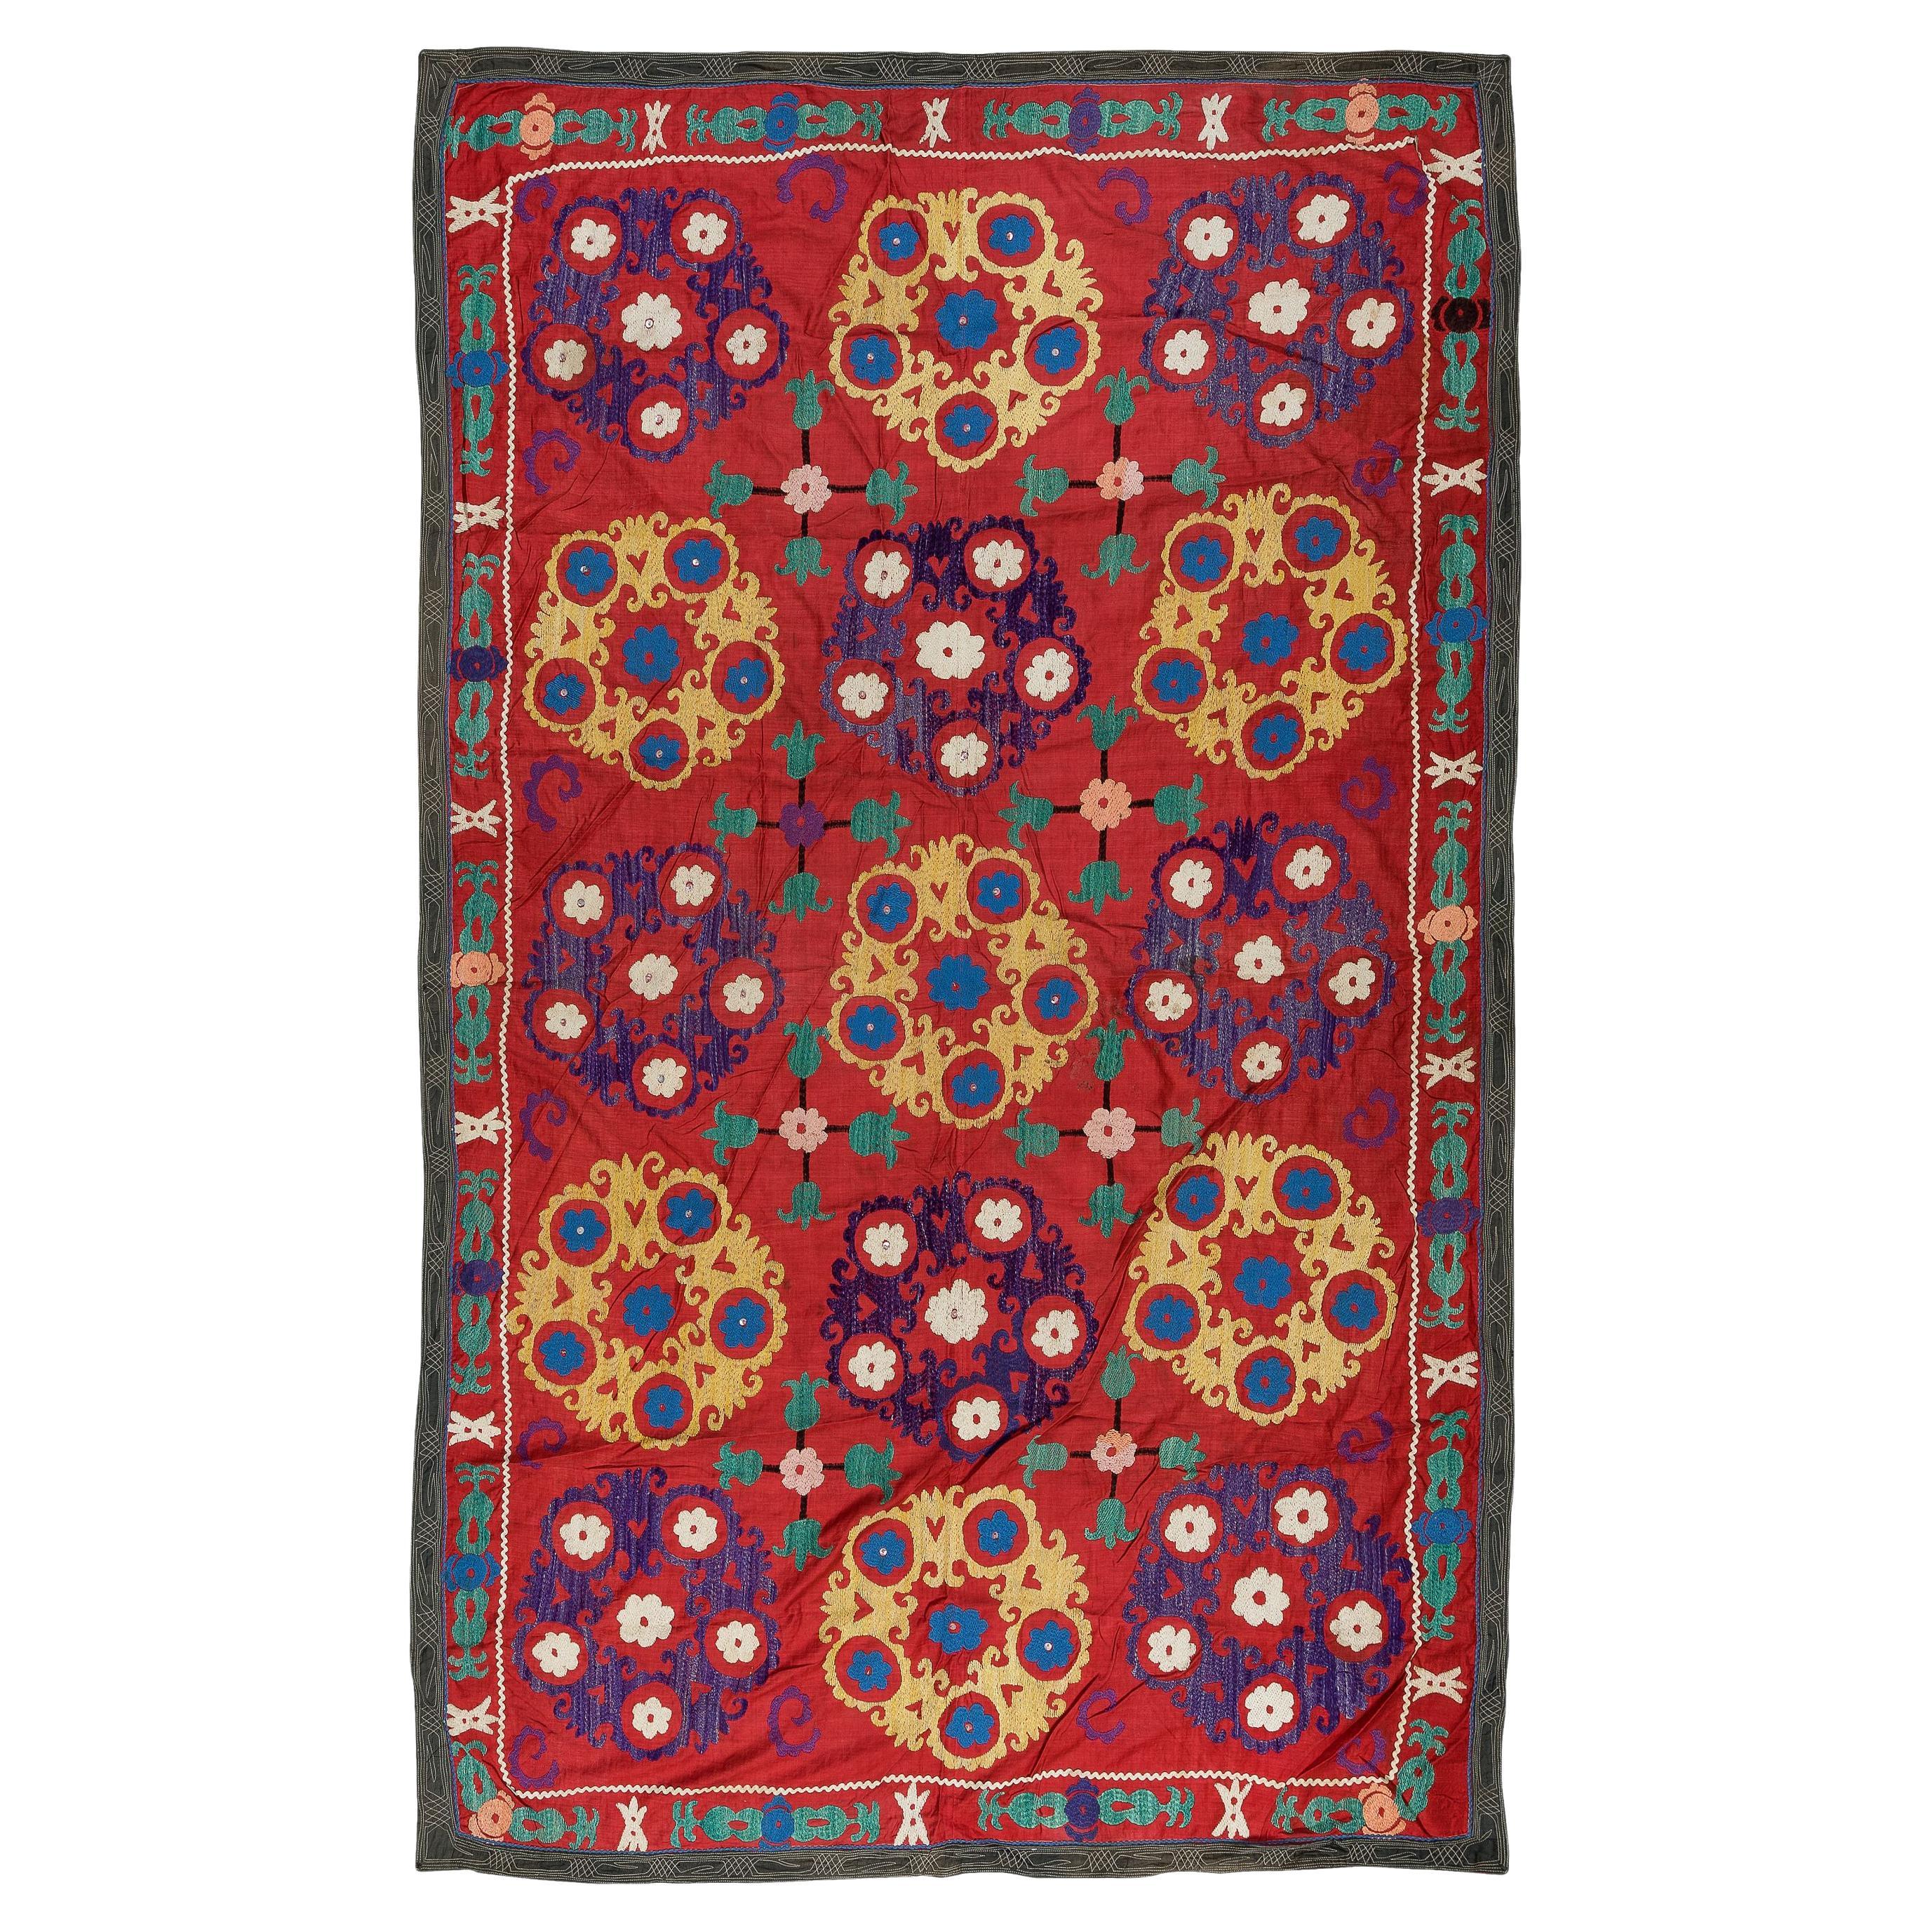 4.6x7 Ft Vintage Silk Embroidery Bed Cover, Uzbek Suzani Wall Hanging in Red